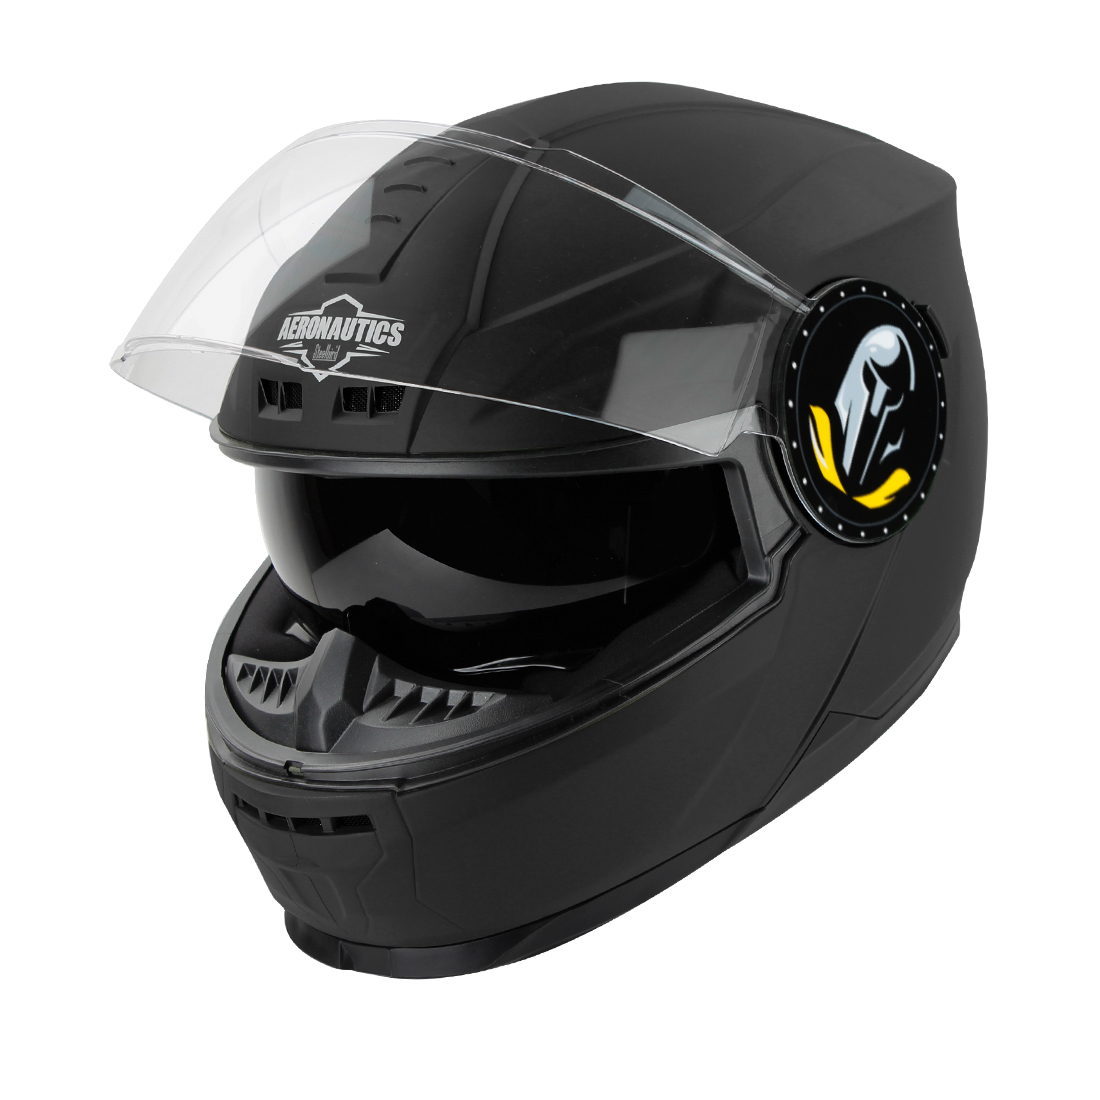 Steelbird SBH-40 ISI Certified Full Face Helmet for Men and Women with Inner Smoke Sun Shield (Glossy Midnight Black)